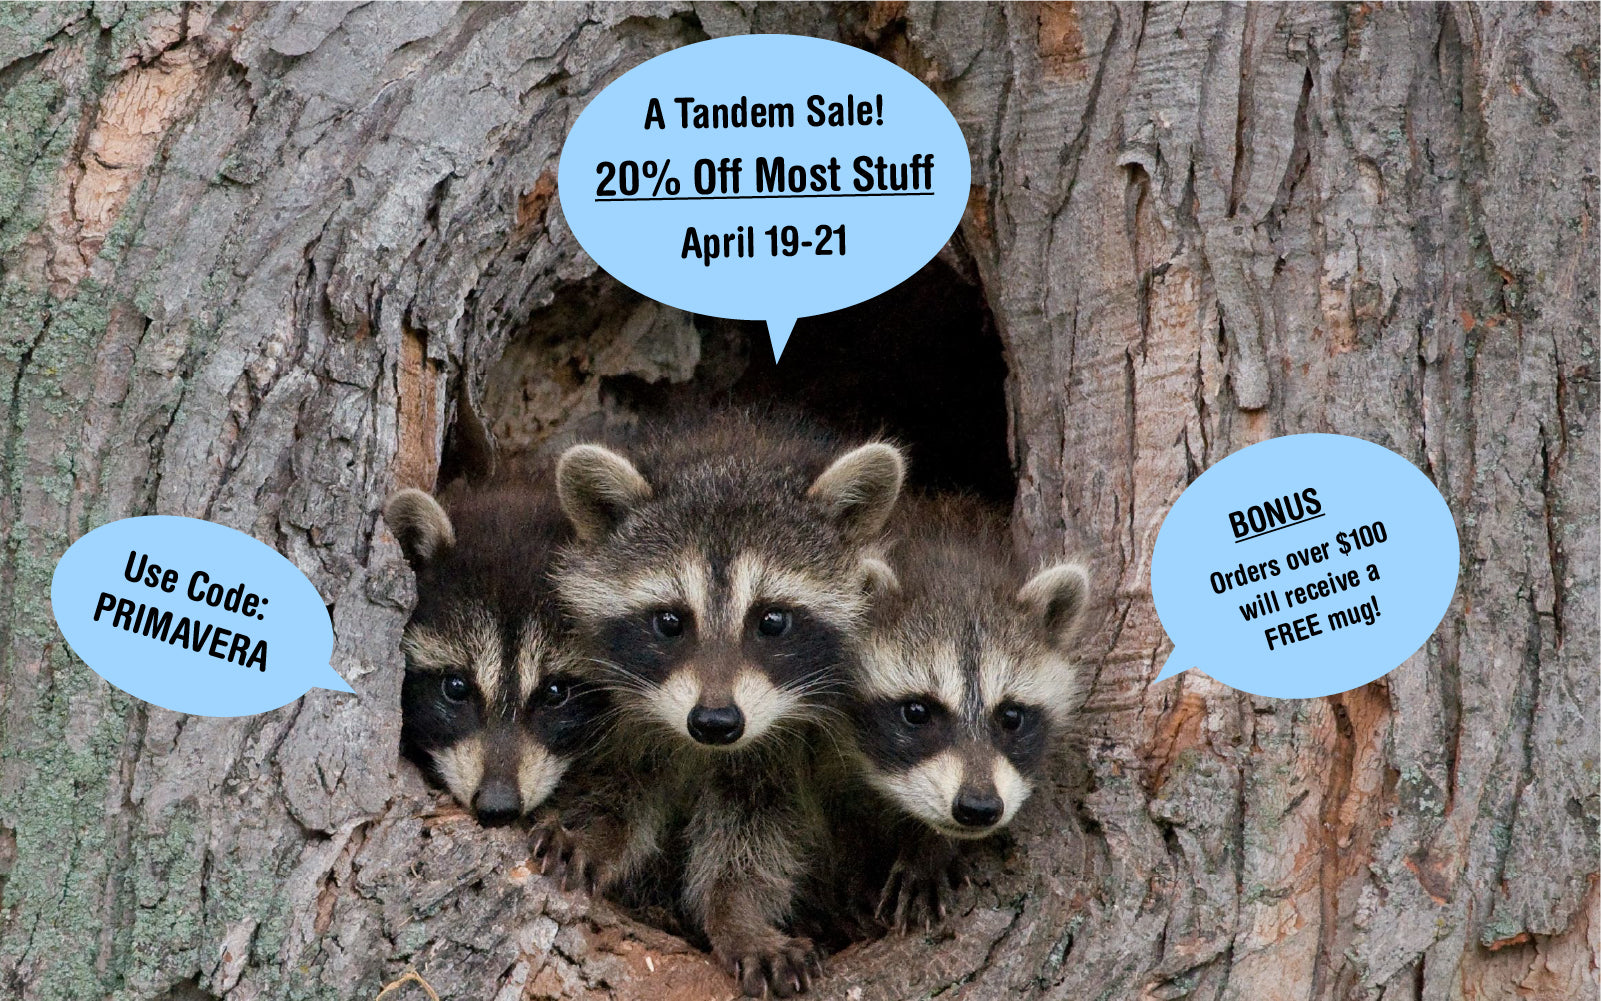 Four raccoons peeking out from a tree hollow with speech bubbles advertising a sale, including details like dates, discounts, and a bonus item offer.